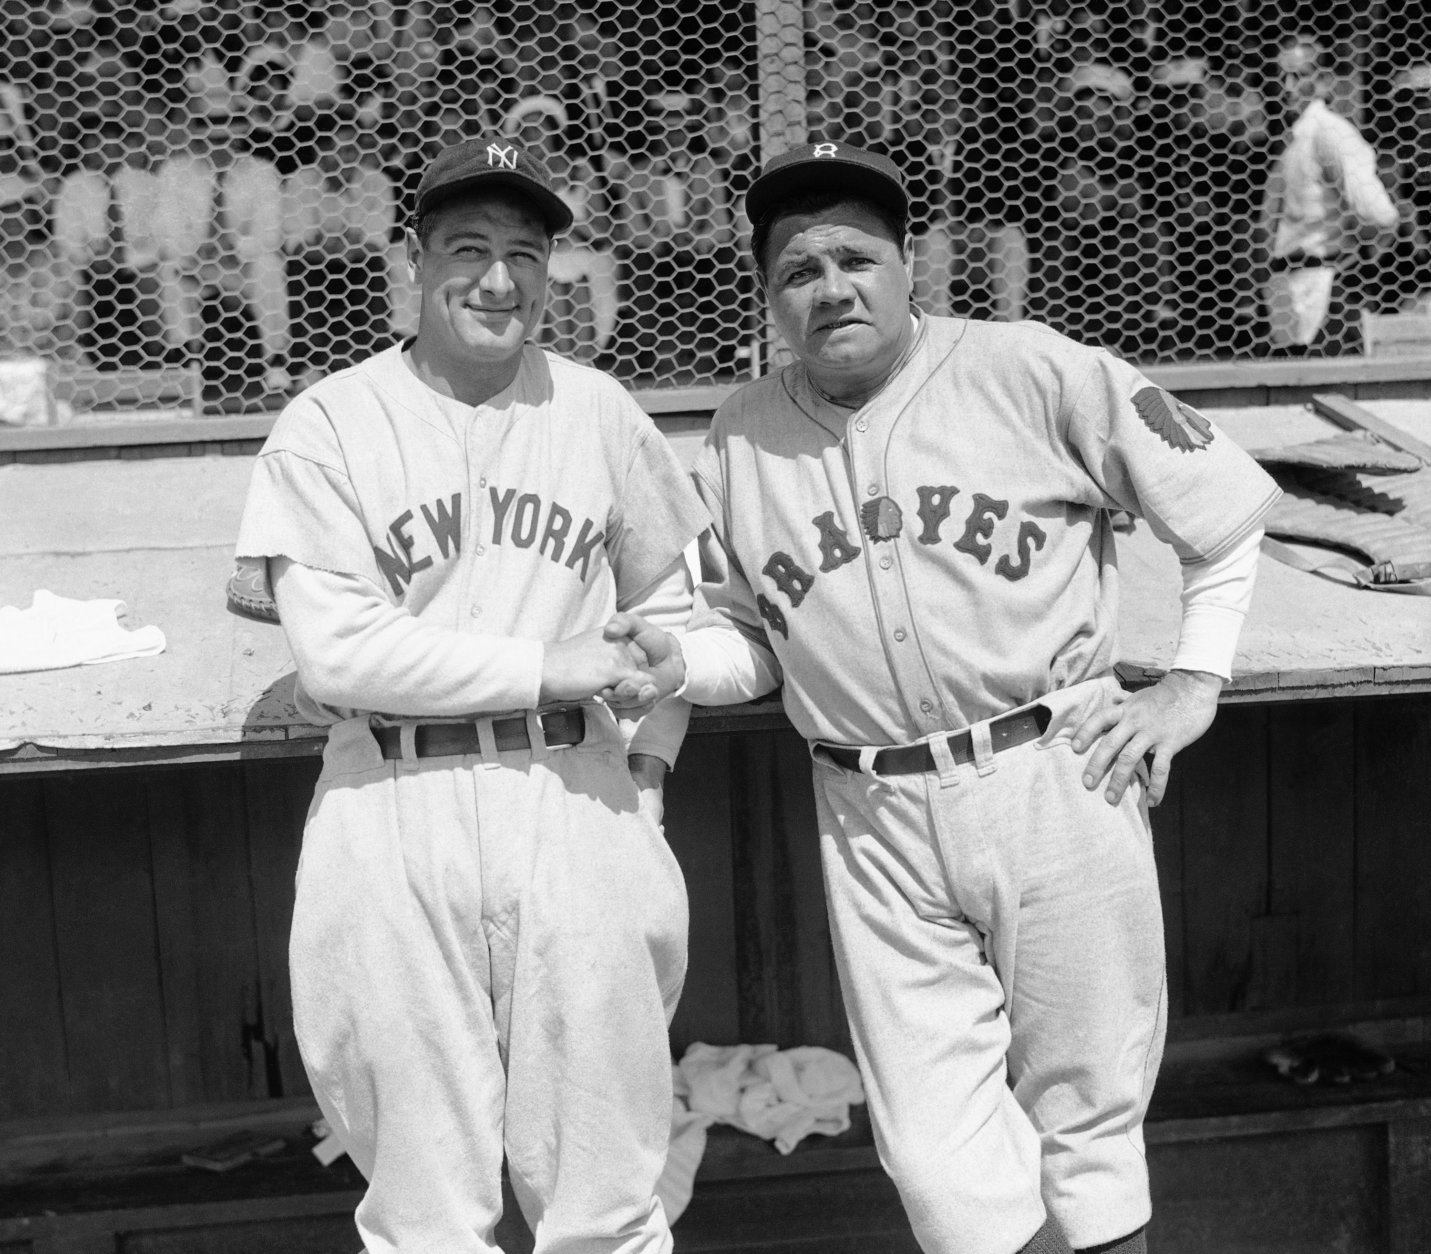 Former New York Yankees teammates Babe Ruth, right, and Lou Gehrig pose together at a spring training game in St. Petersburg, Fla., March 16, 1935 as they met for the first time after Ruth left the Yankees for the Boston Braves.  The Braves defeated the Yankees 3-2 in the exhibition game. (AP Photo/Tom Sande)